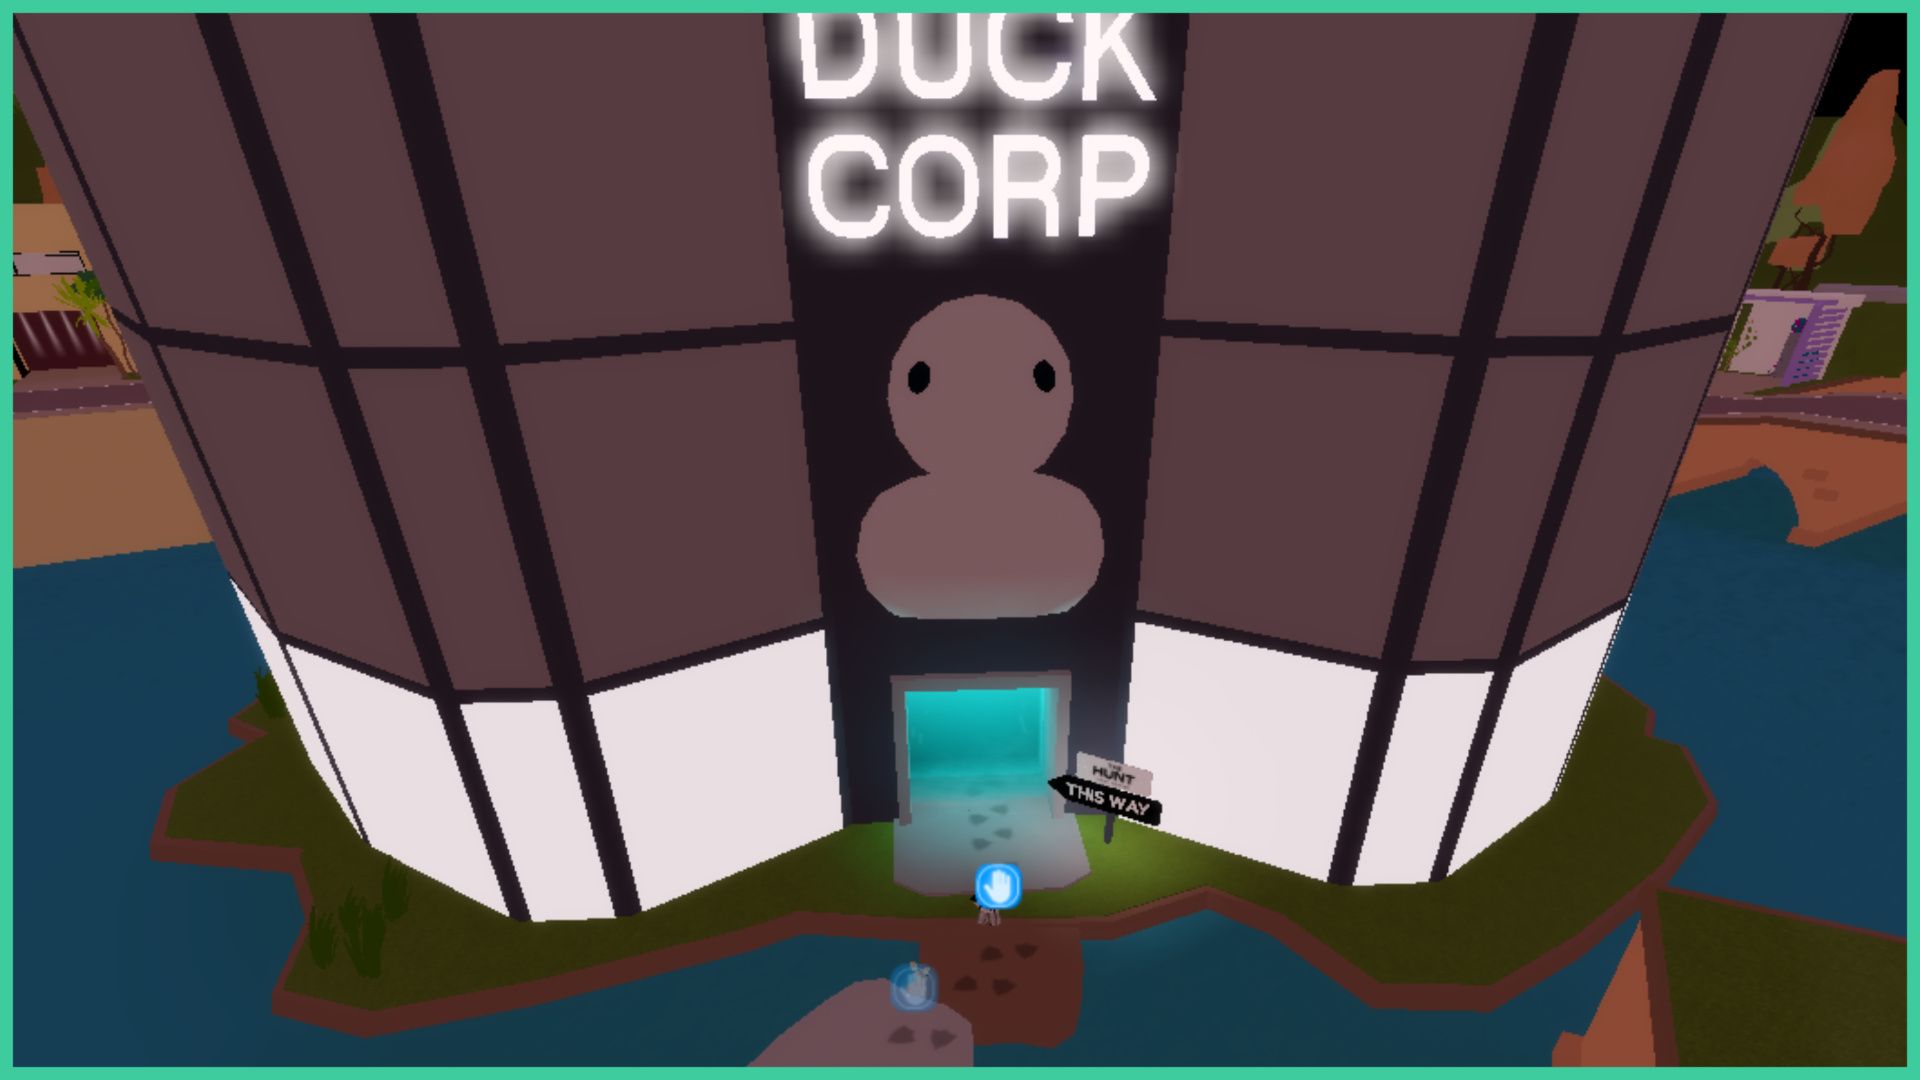 feature image for our club roblox the hunt guide, it's a screenshot of the duck corp building with a large duck on the front with a glowing sign that reads 'duck corp', the building is surrounded by a river of water with large stone steps that lead to the building, the entrance glows blue with a sign to the right that reads 'the hunt this way'